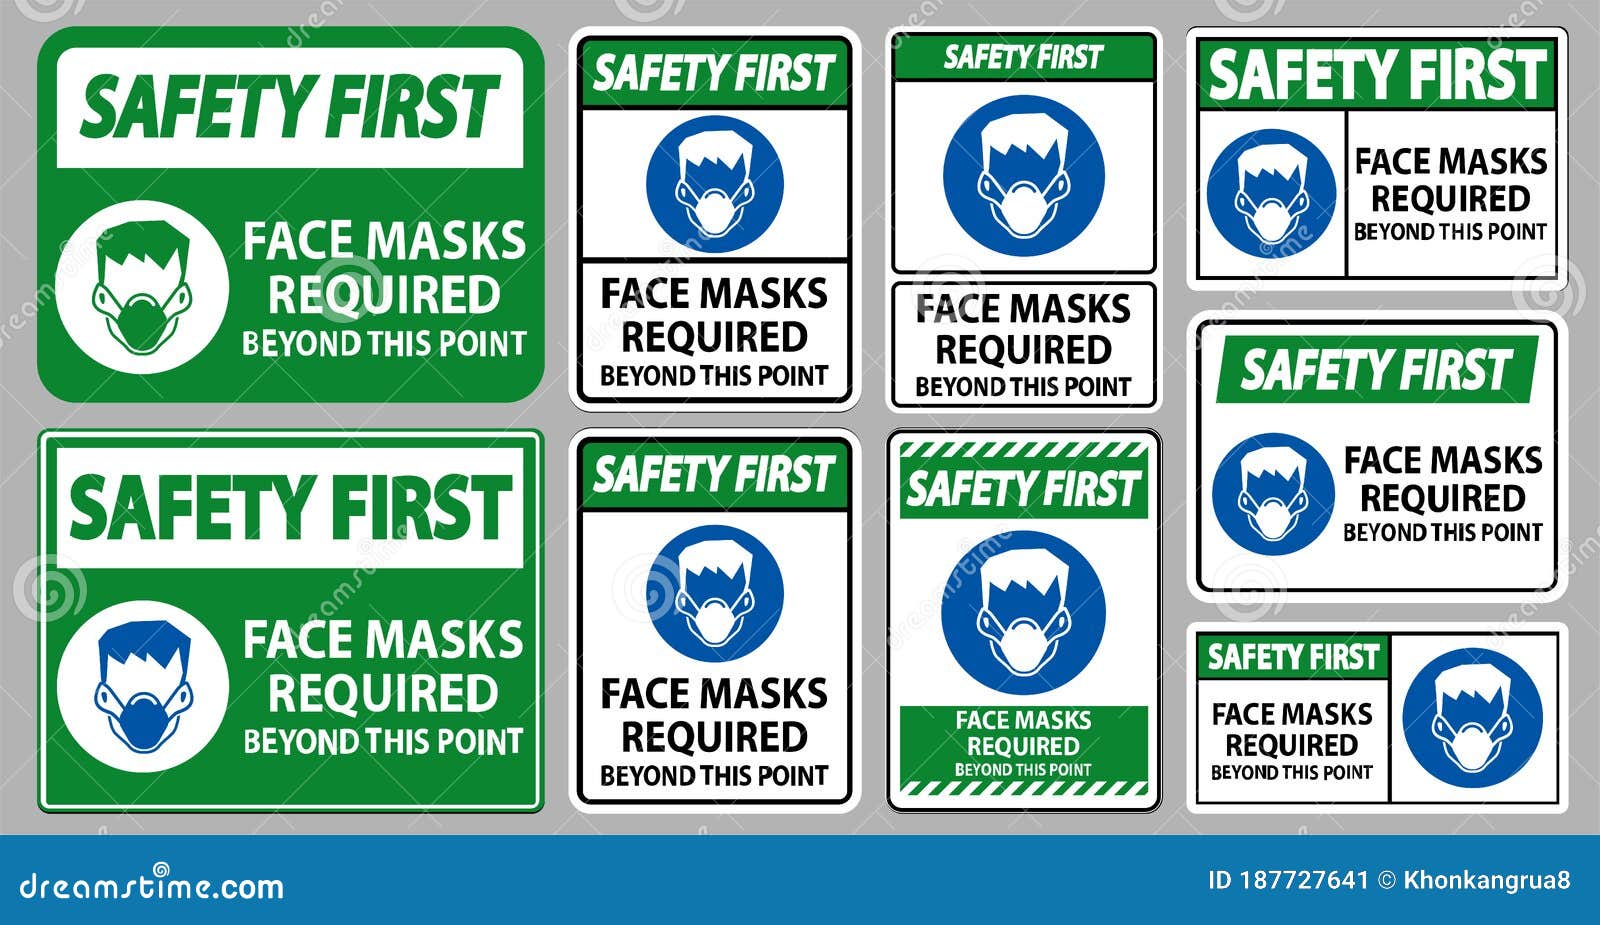 safety first face masks required beyond this point sign isolate on white background